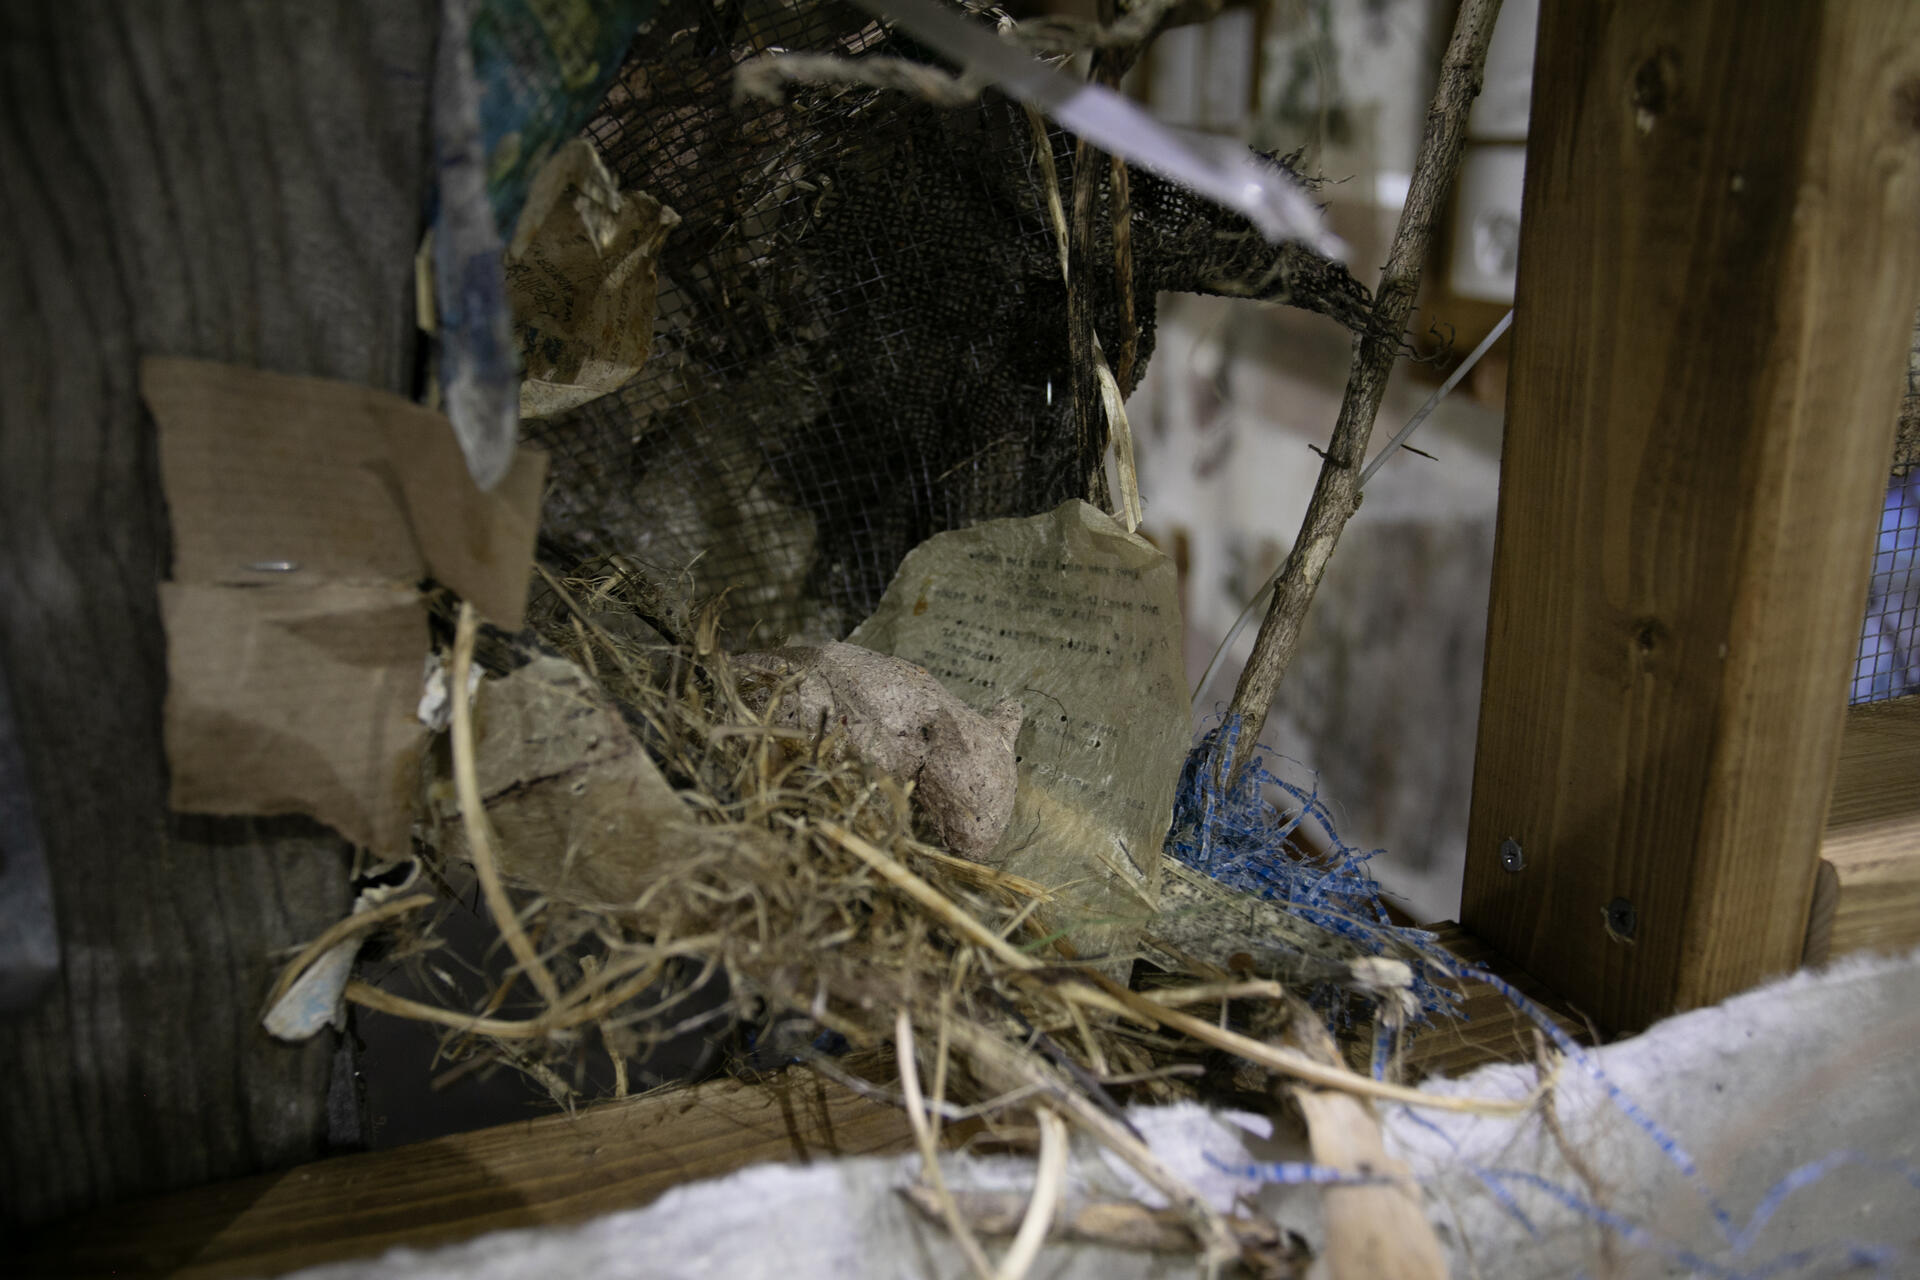 A little baby rat made of textued paper, in a nest that goes through the wall structure. The nast is made of burlap, hardware cloth, paper, hay and plastic scraps.